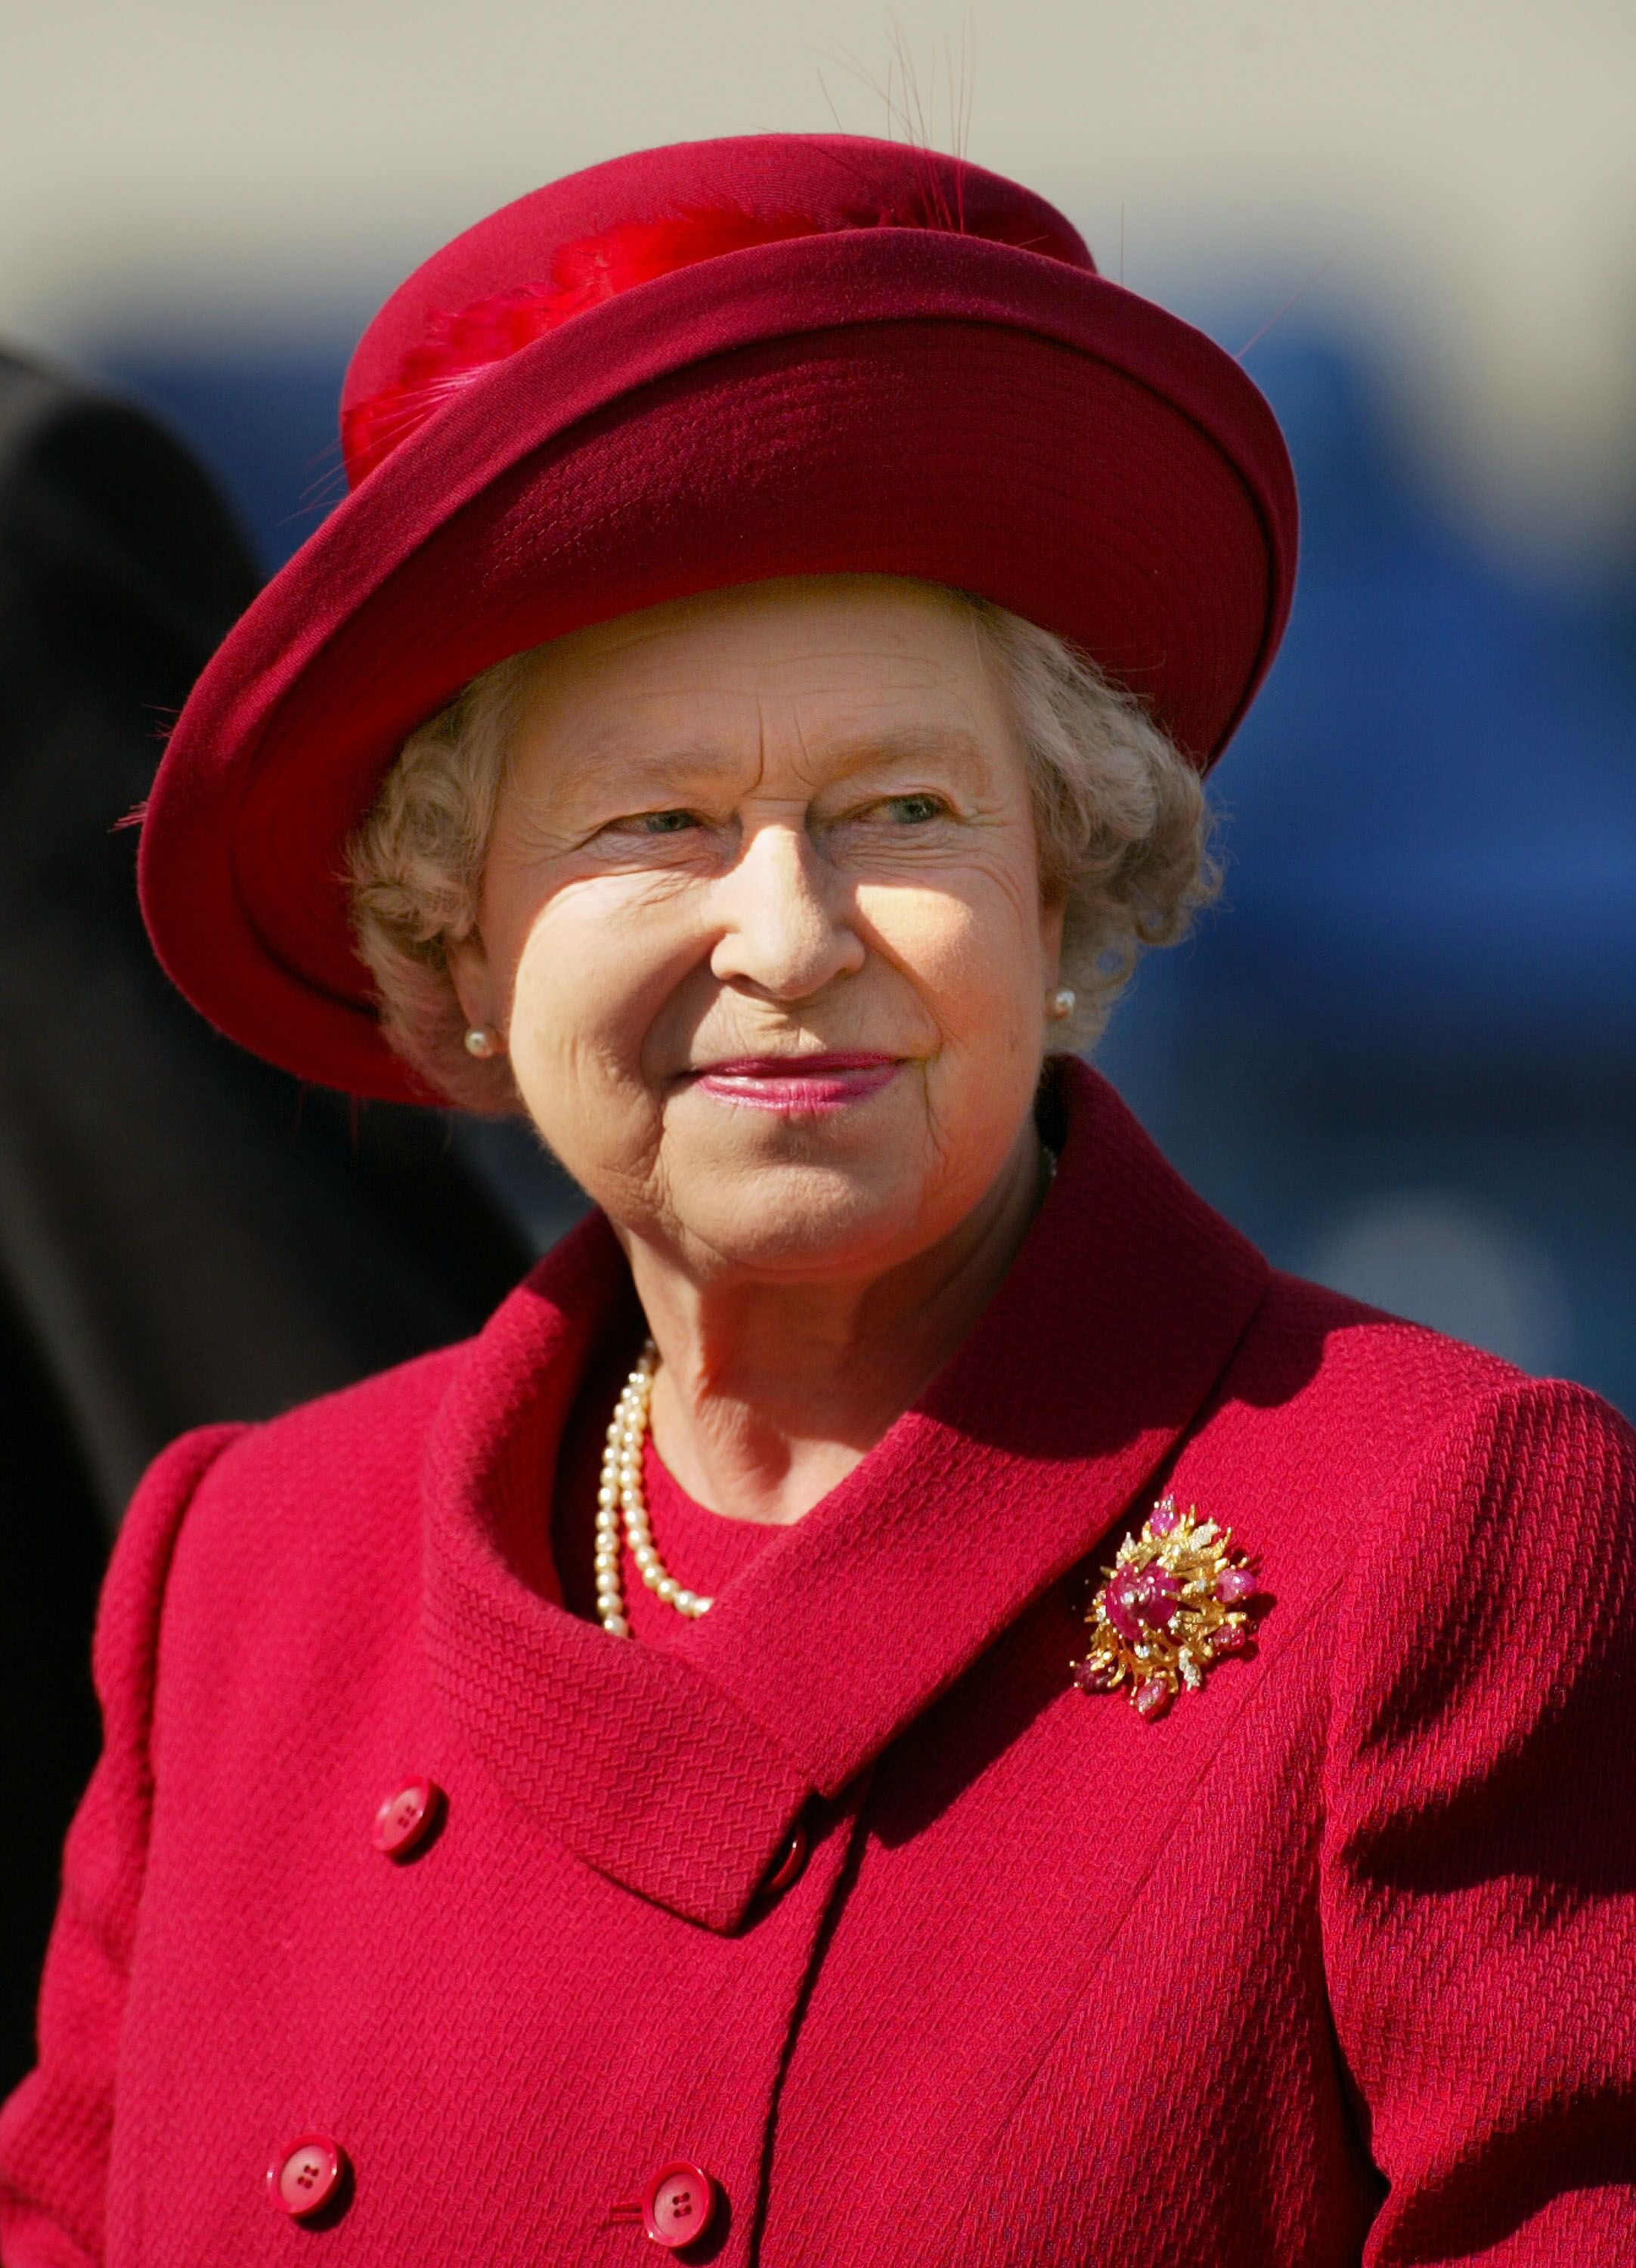 Queen Elizabeth pictured after she presented an award at Household Cavalry soldier at The Royal Windsor Horse Show, 2002, England. | Photo: Getty Images